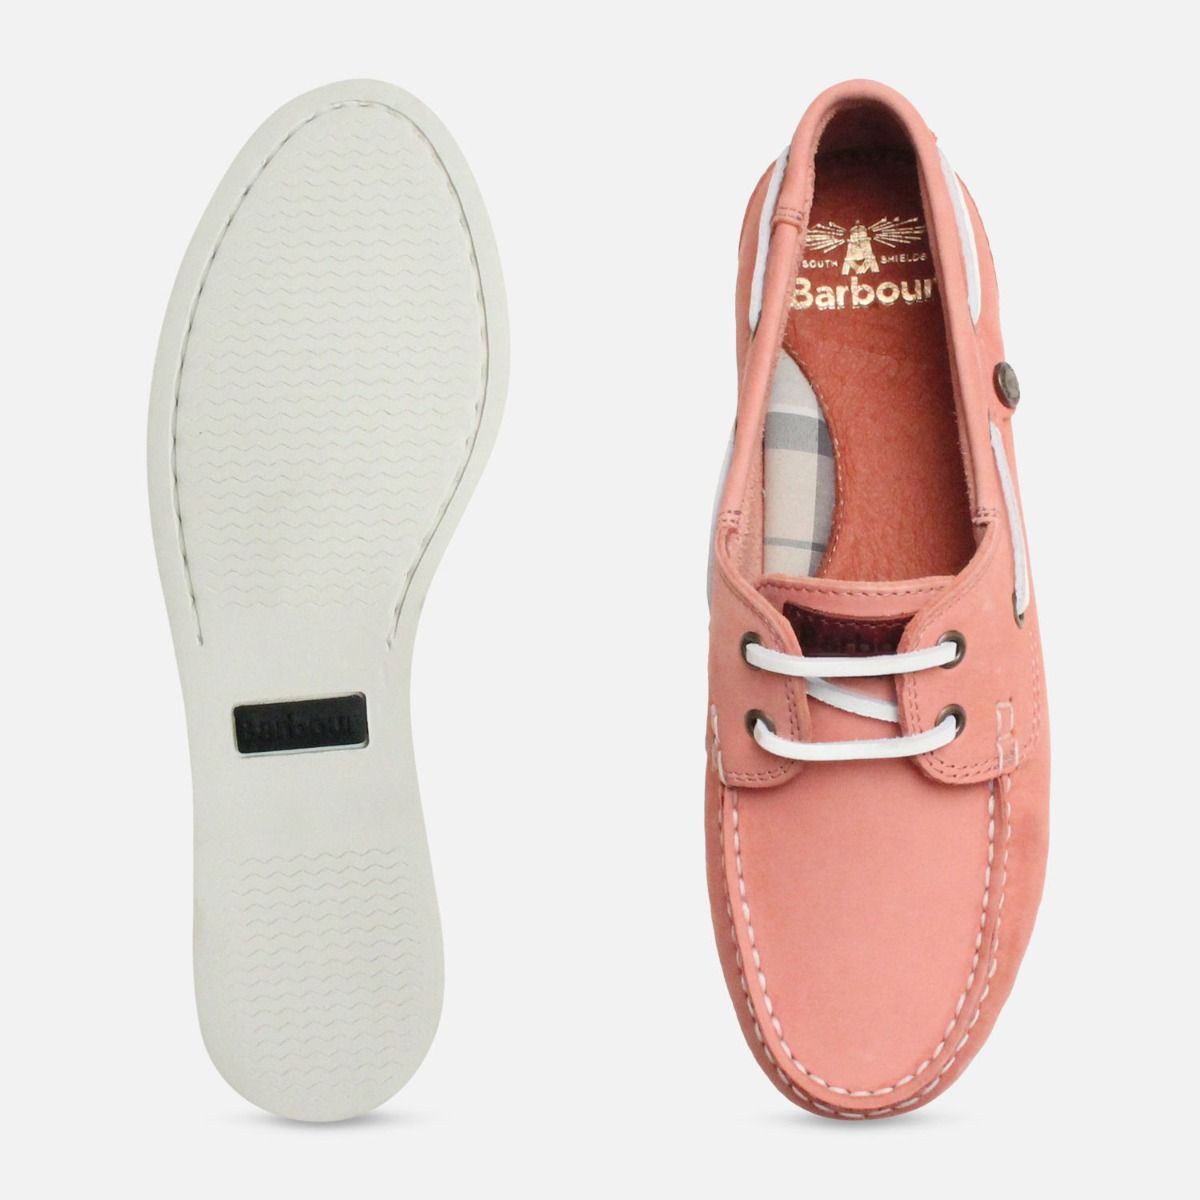 white sole boat shoes